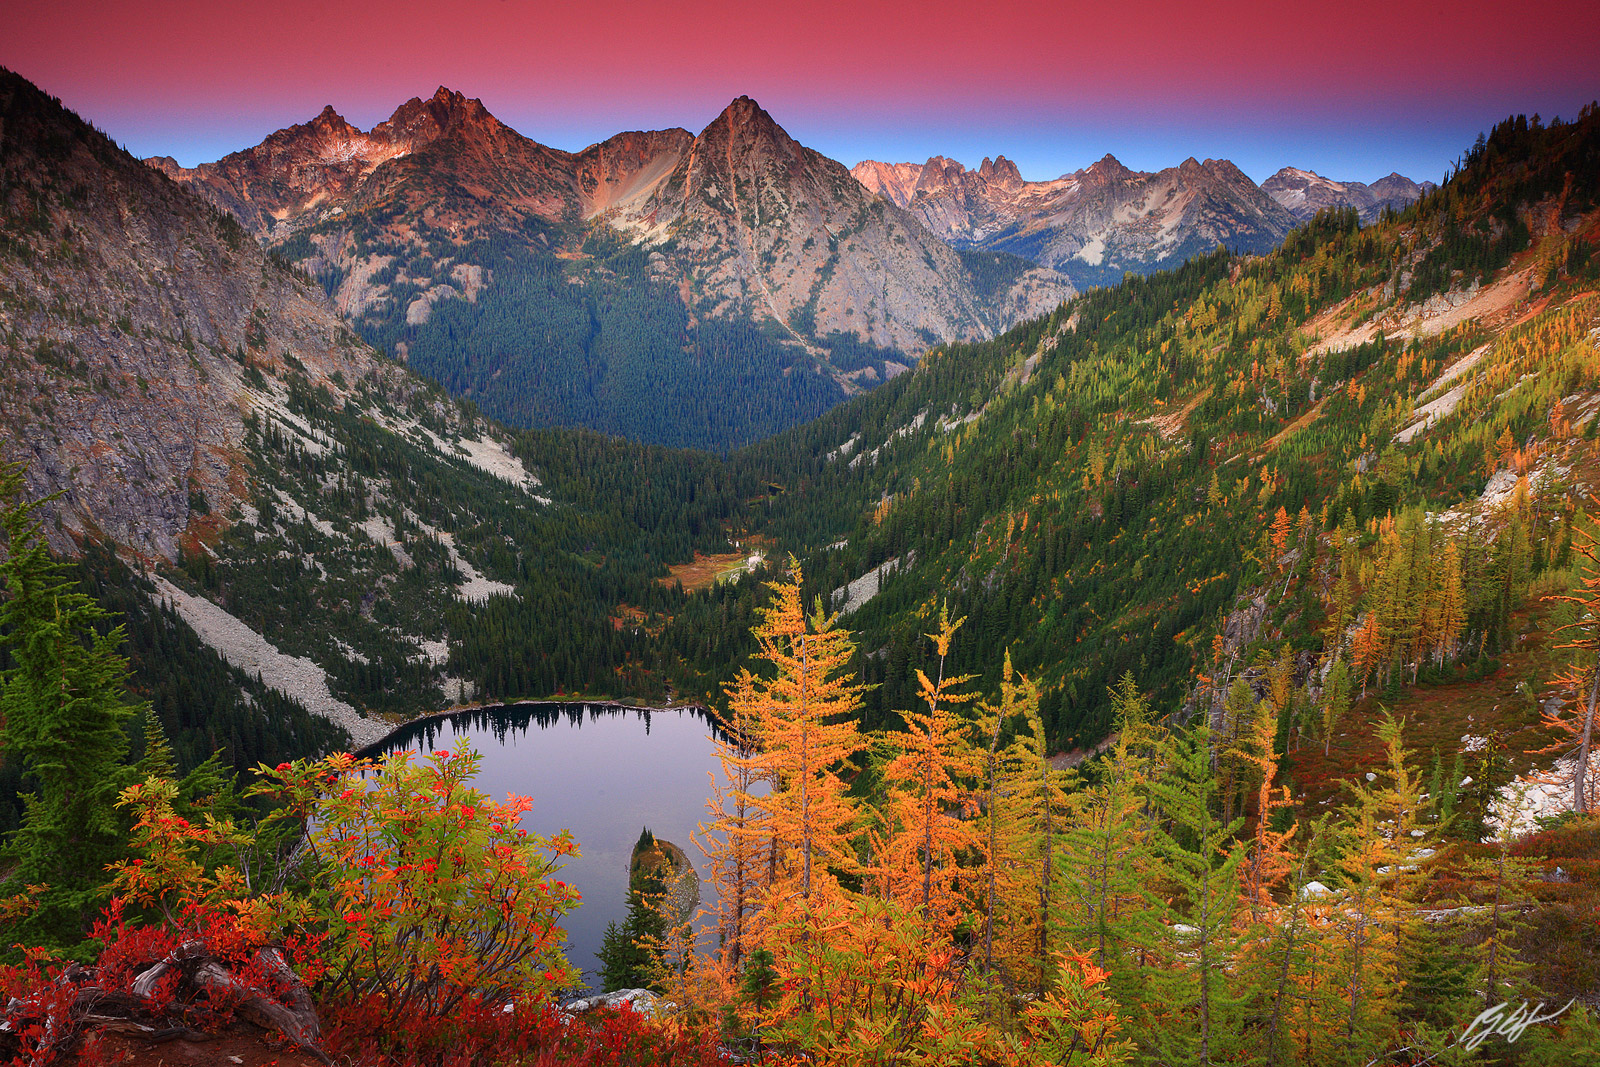 Sunset Over Lake Ann and the North Cascades from Maple Pass, North Cascades, Washington